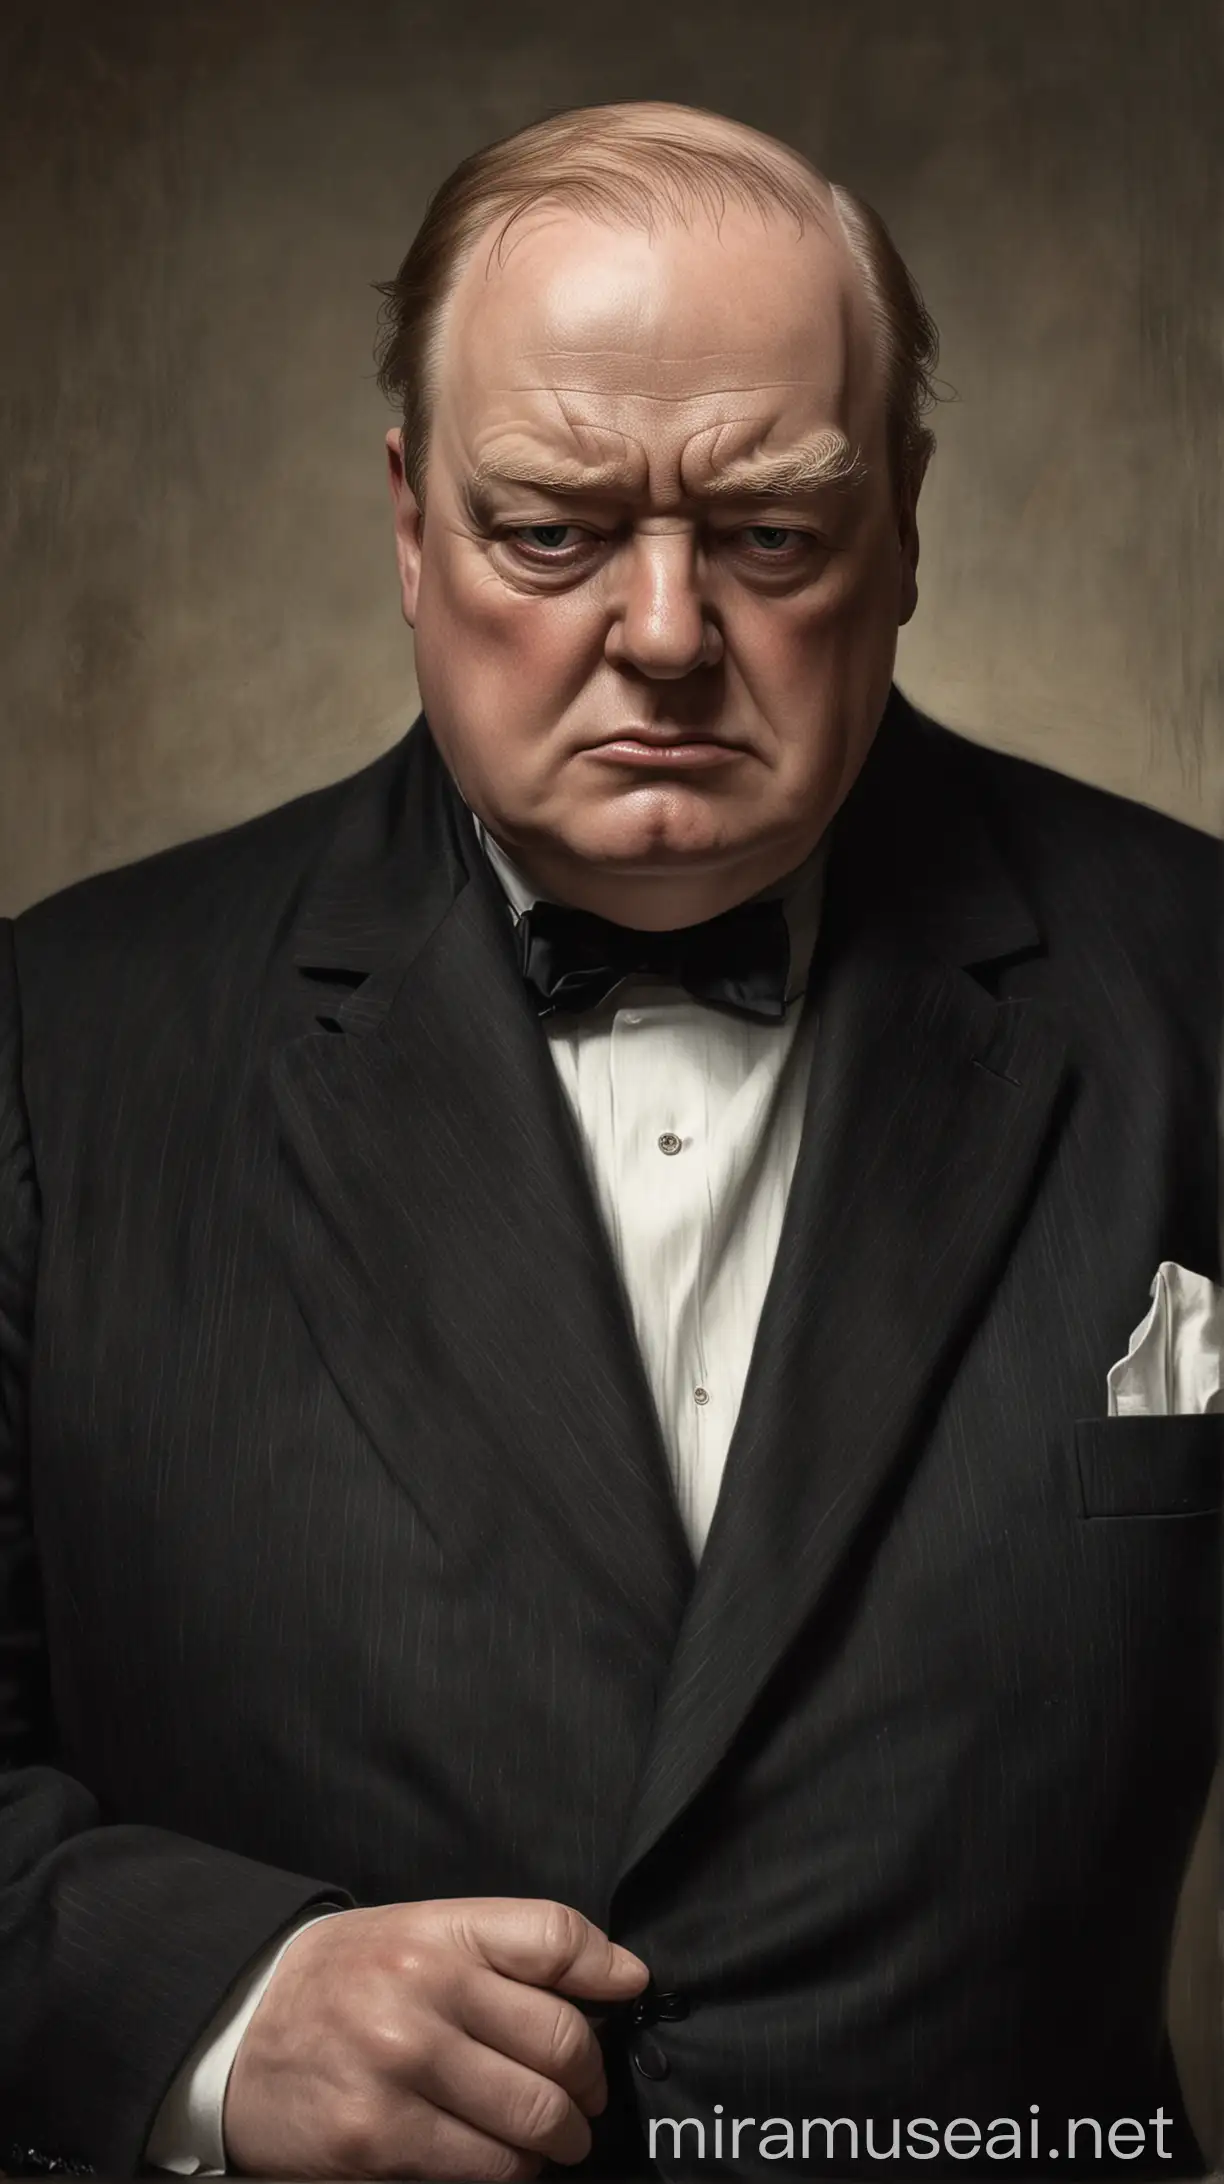 A final image of Churchill, his gaze steely and determined, a reminder that even in the face of adversity, leaders must make difficult choices for the greater good. hyper realistic